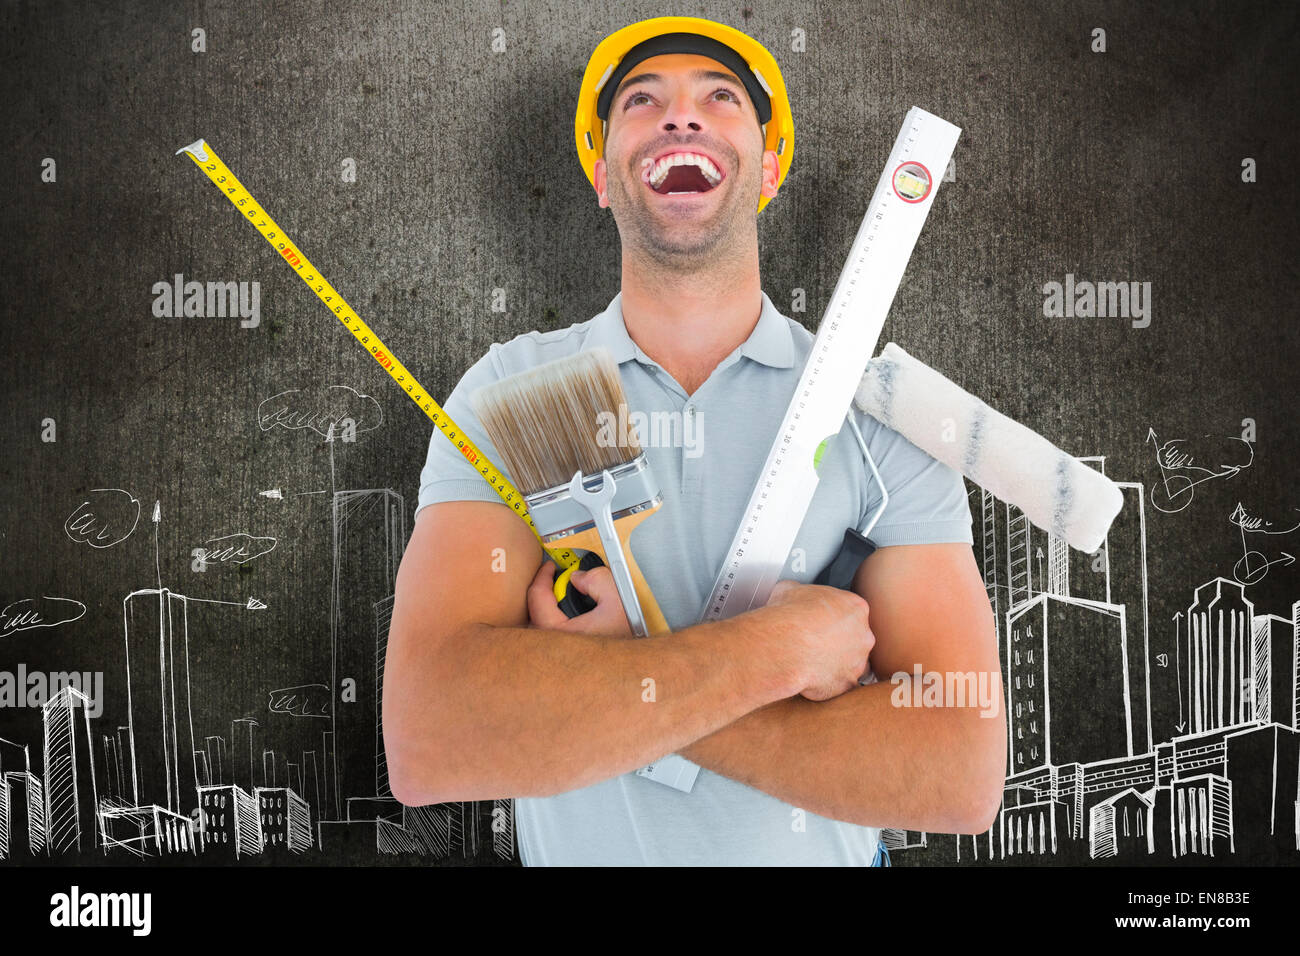 Composite image of laughing manual worker holding various tools Stock Photo